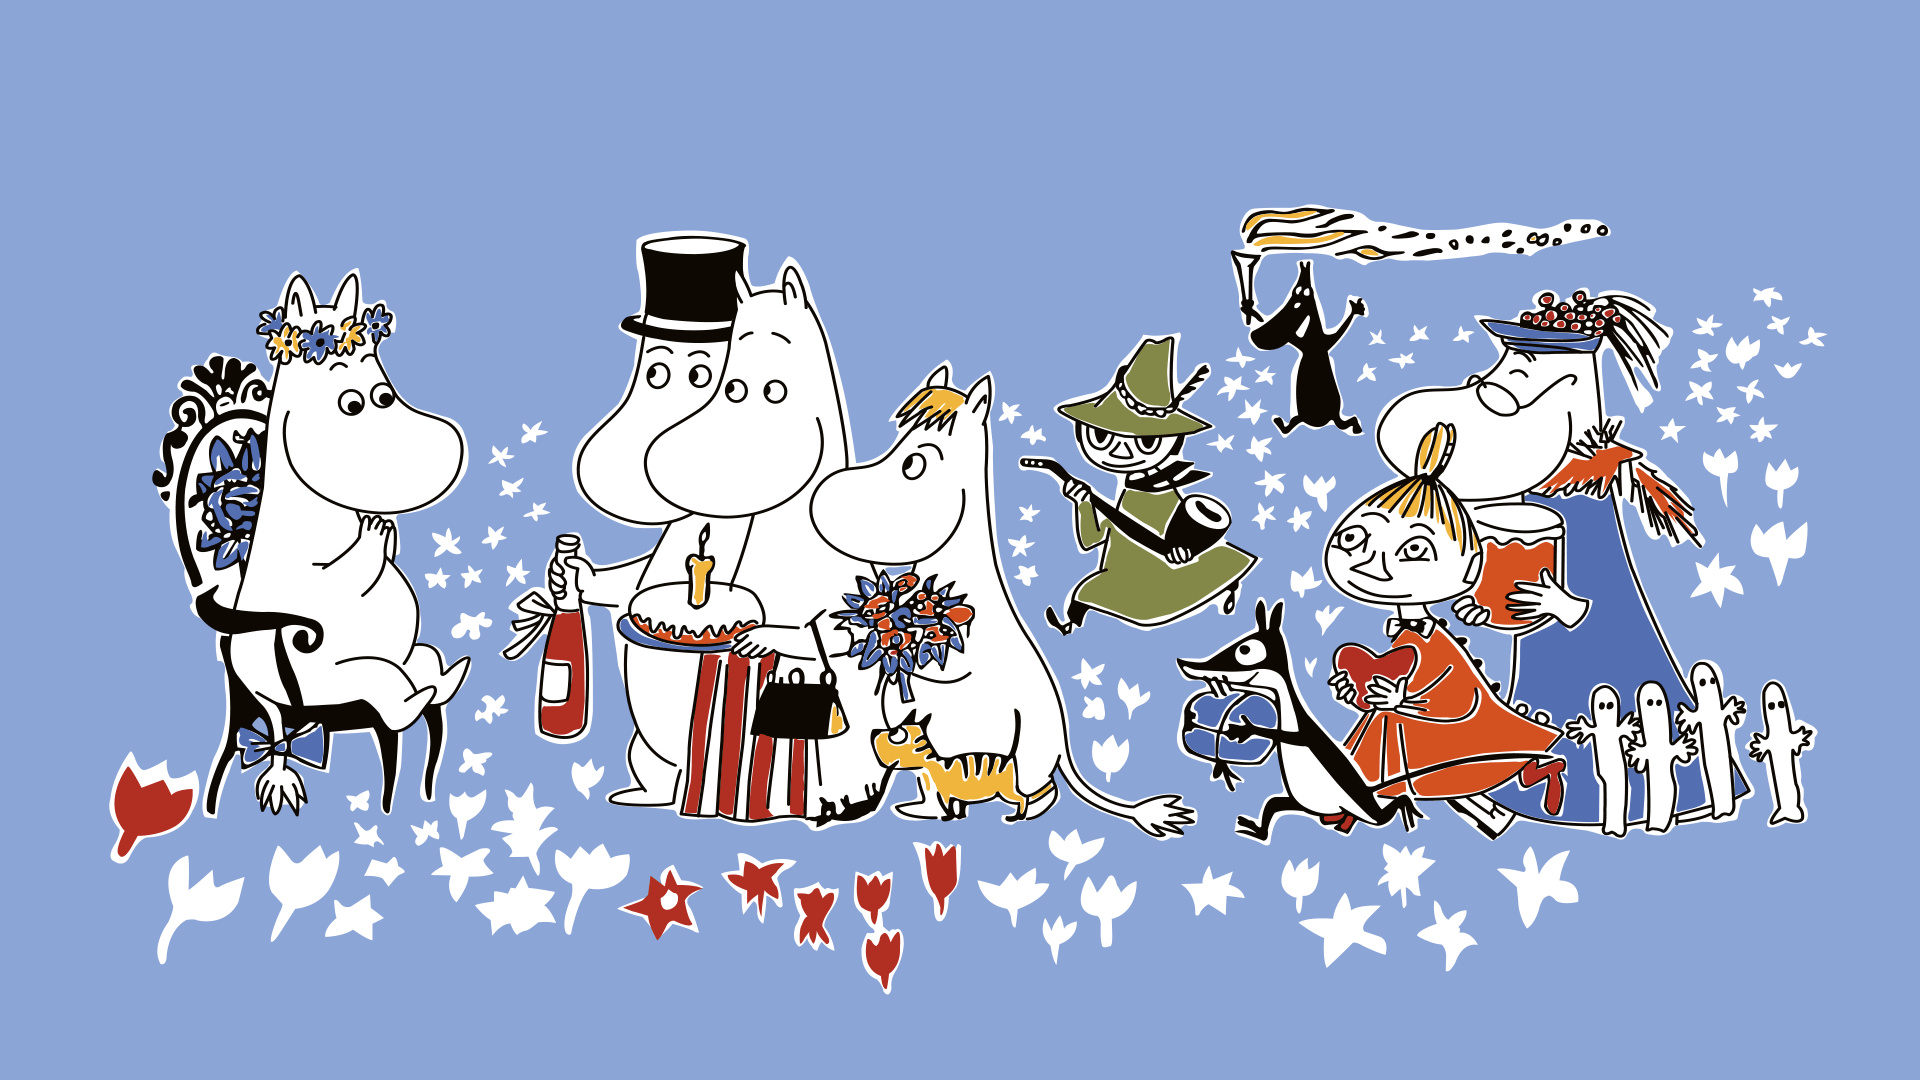 Moomin: A story of love and courage from Finland. 1920x1080 Full HD Wallpaper.